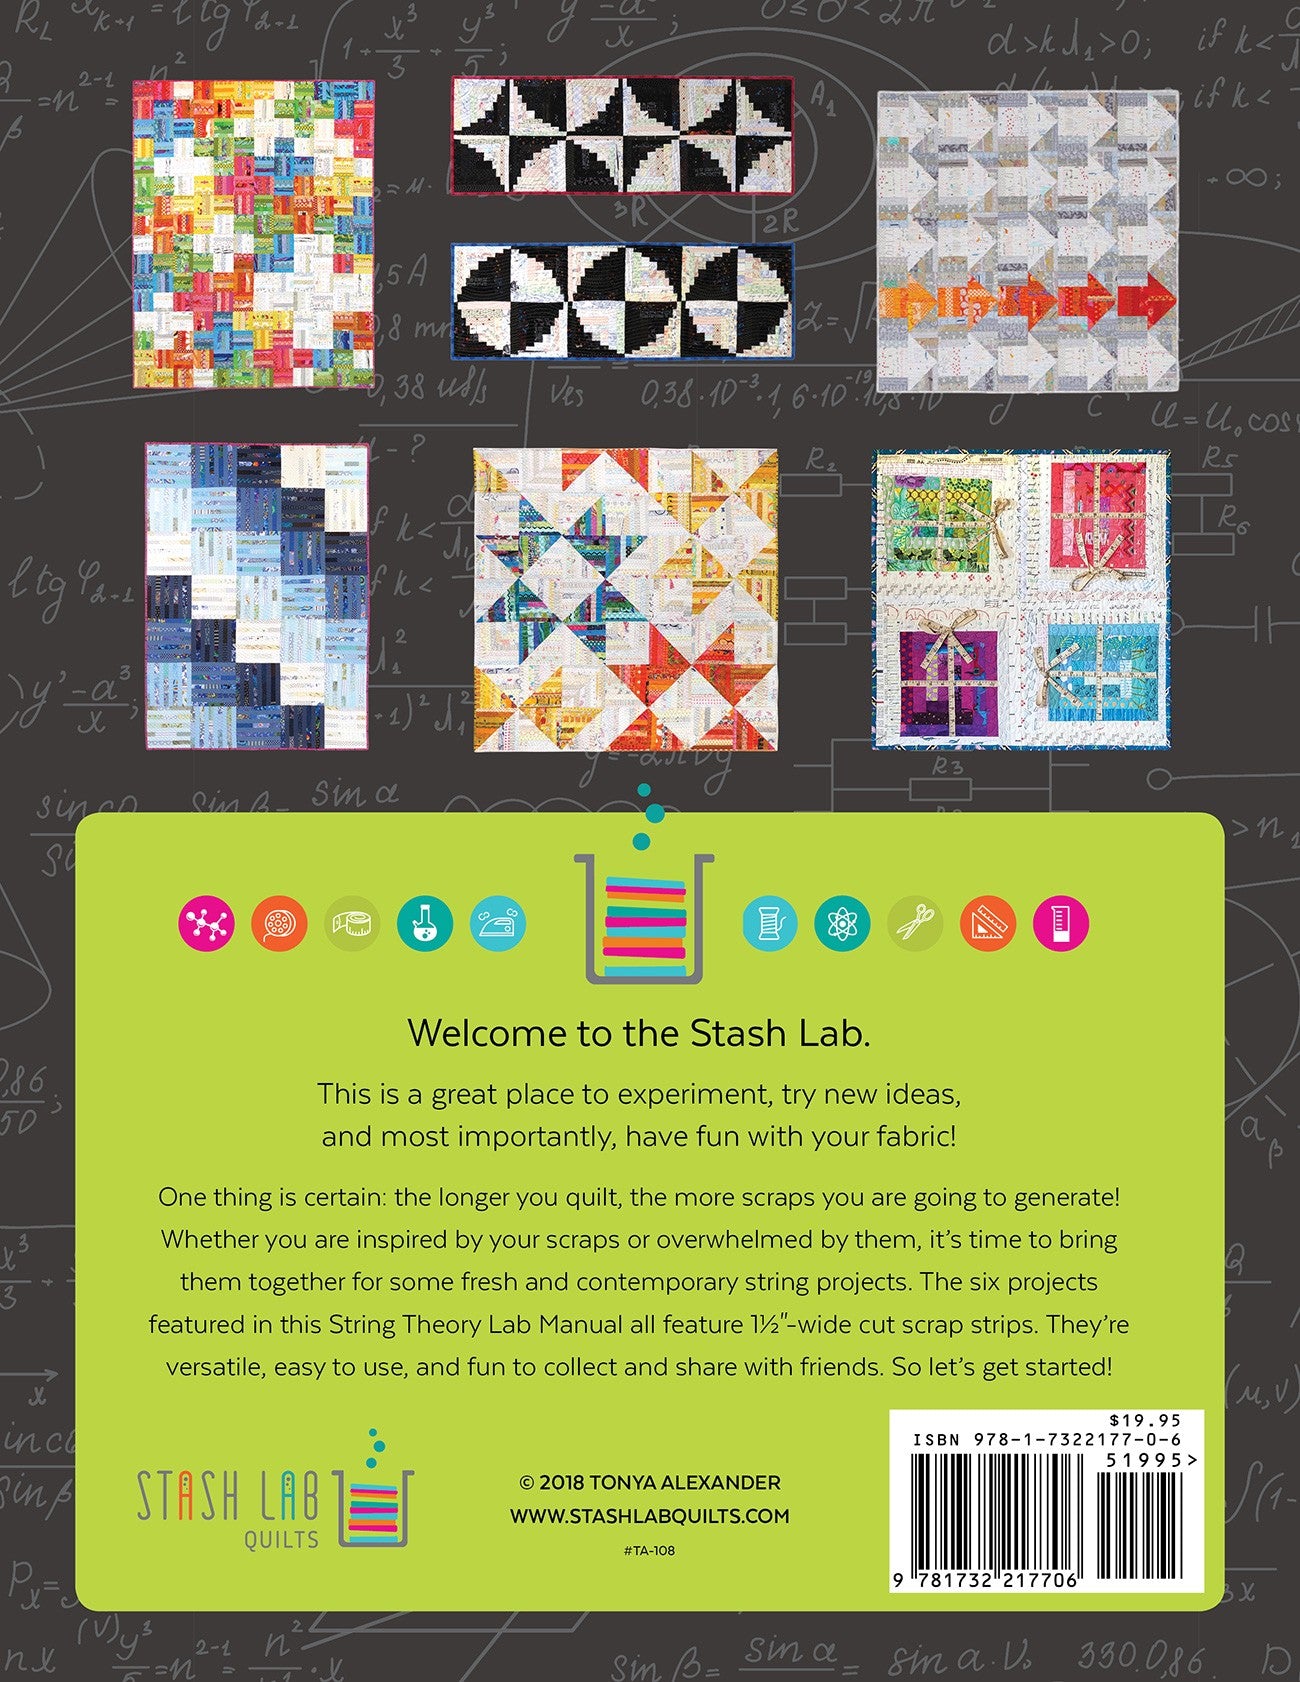 String Theory Lab Manual Quilt Pattern Book by Tonya Alexander of Stash Lab Quilts